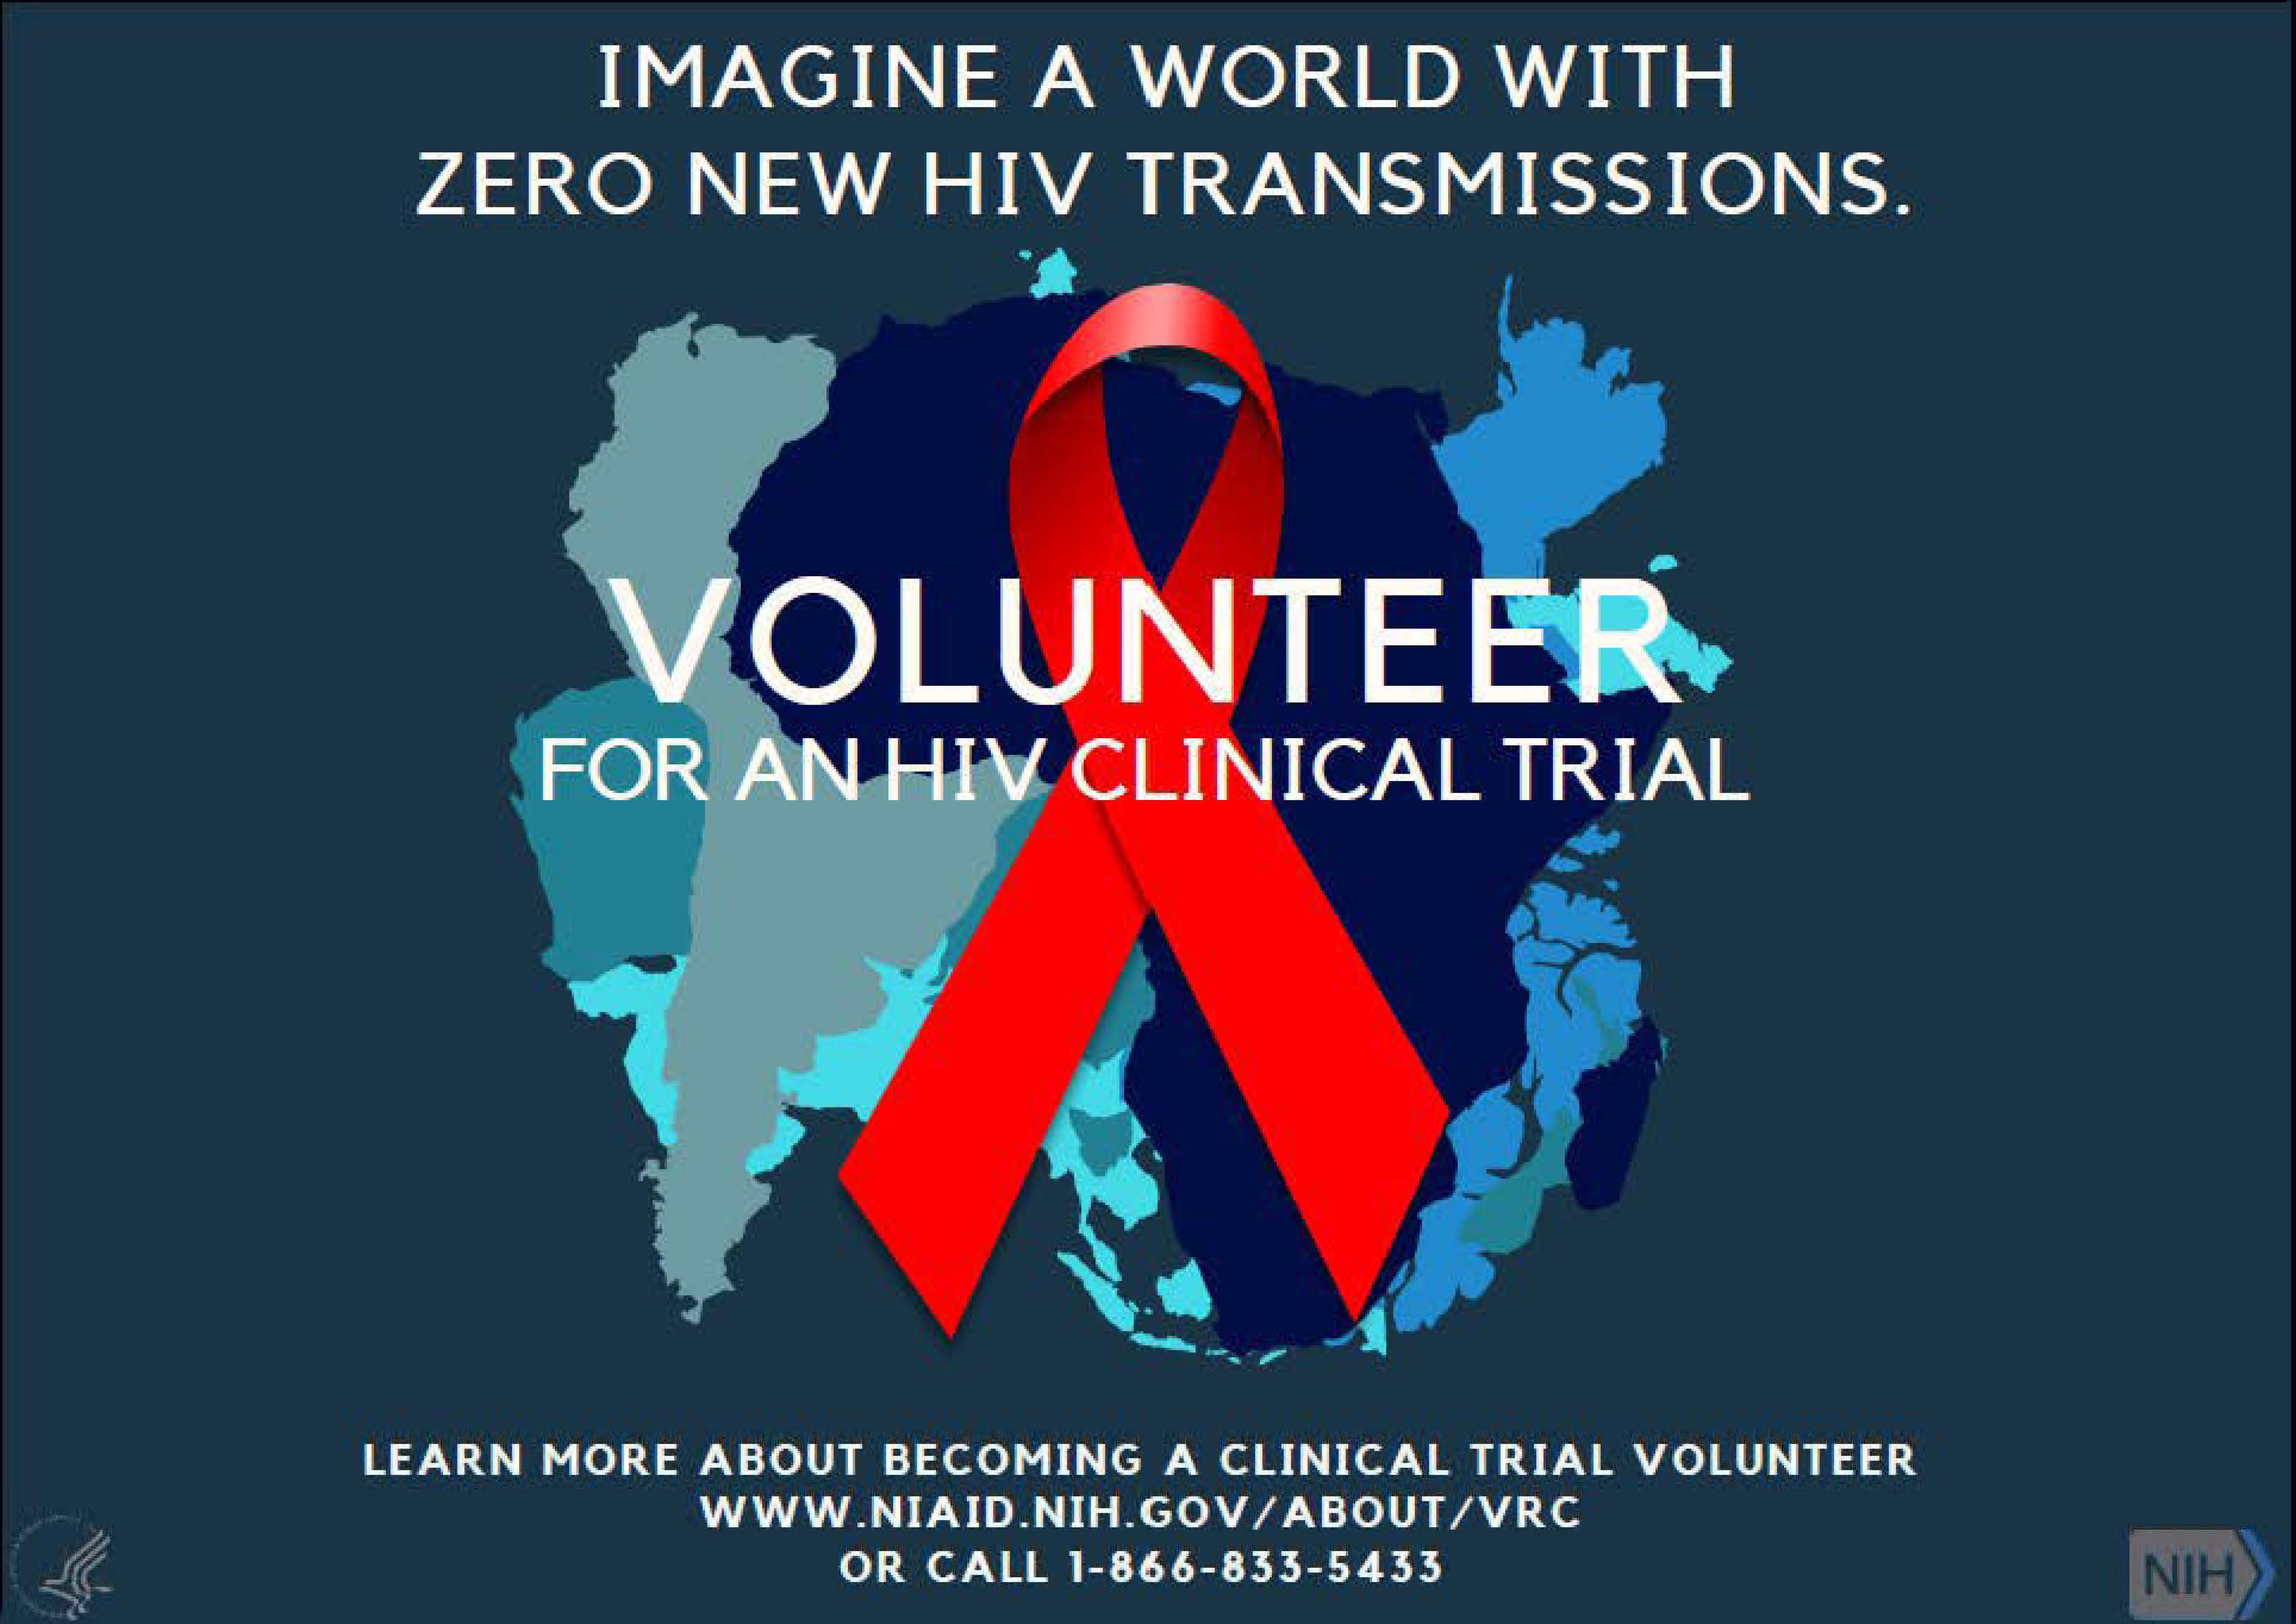 HIV Clinical Trial Volunteer